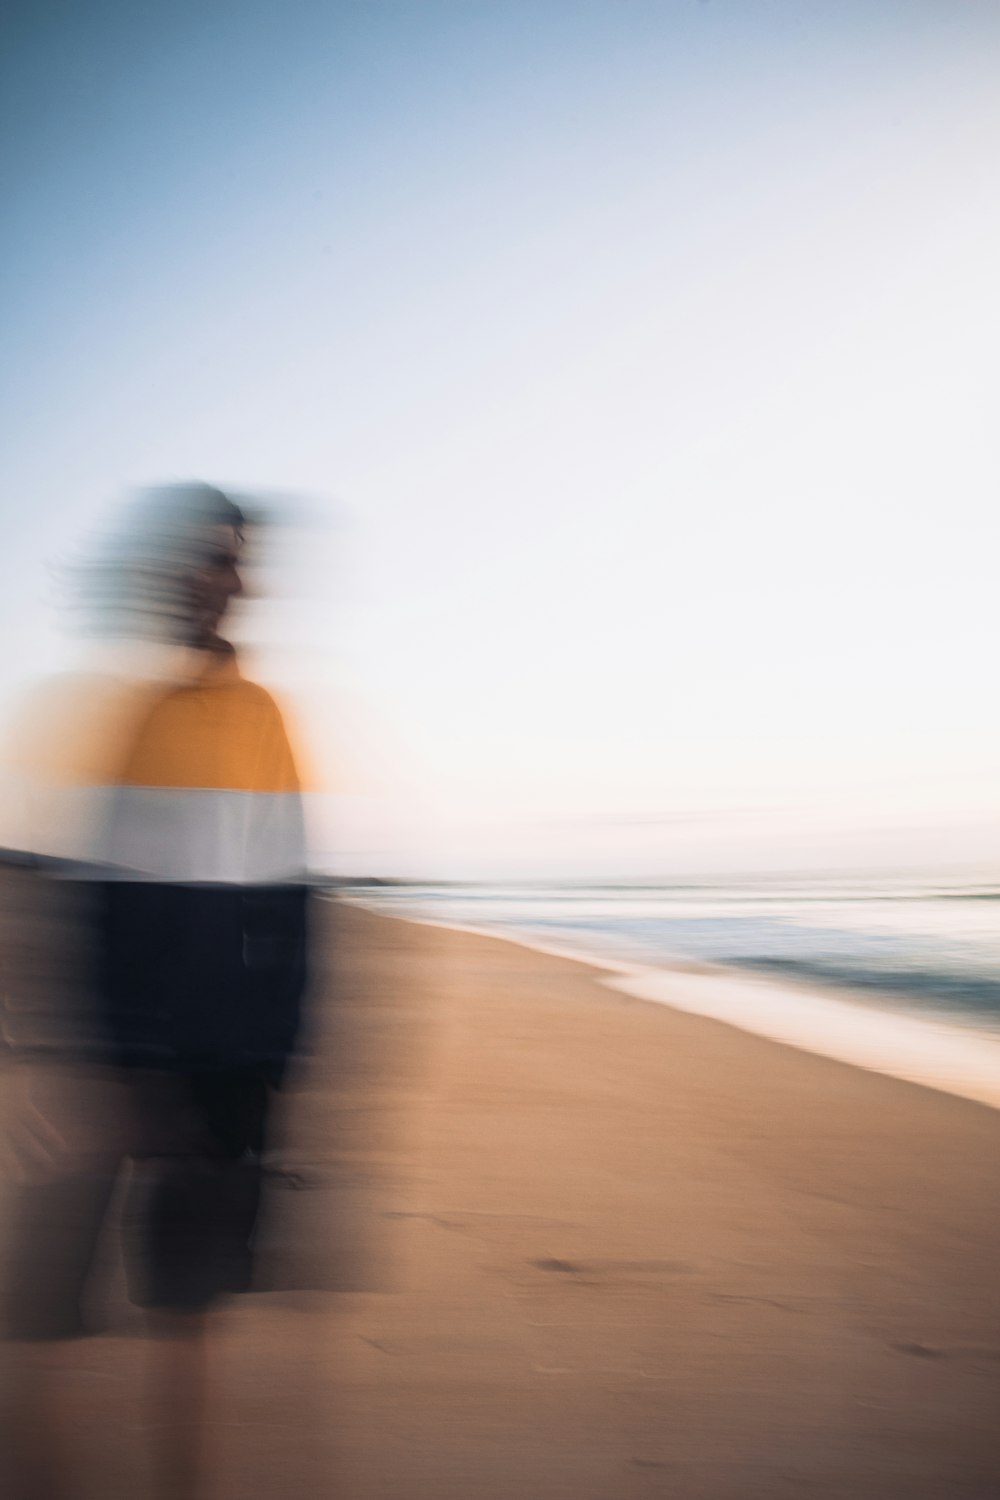 a blurry photo of a person walking on a beach